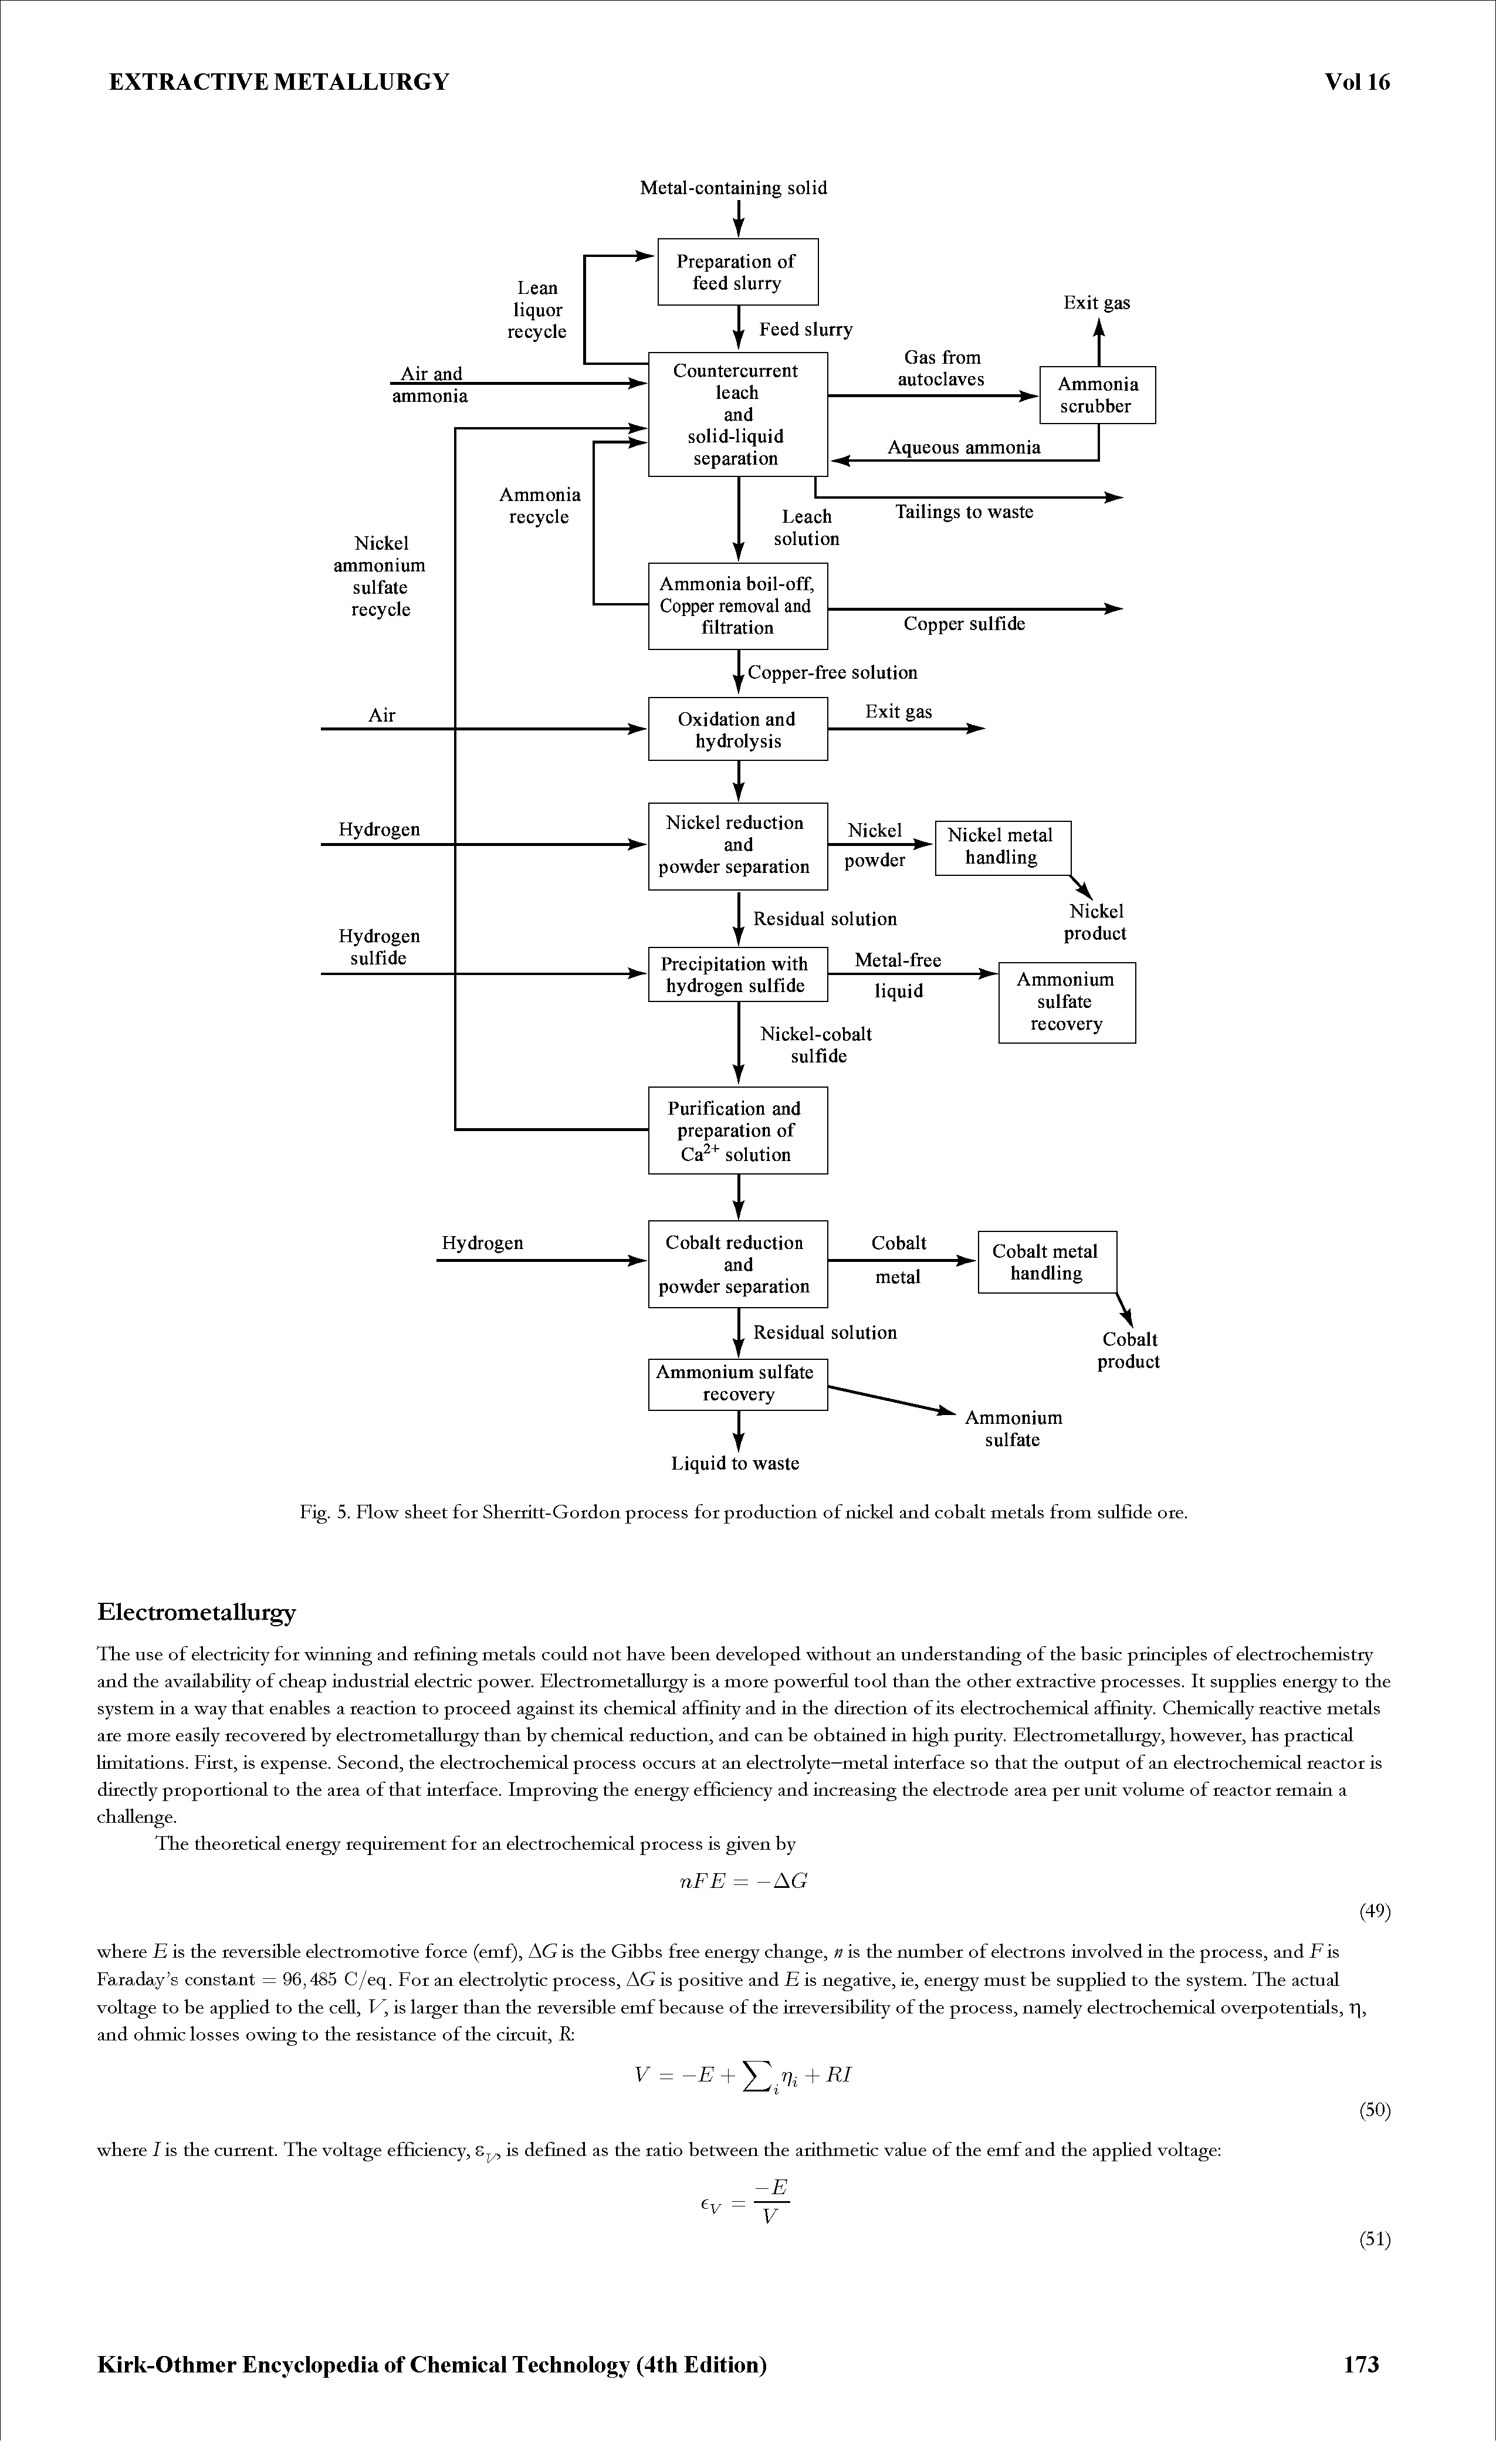 Fig. 5. Flow sheet foi Sheiiitt-Goidon process for production of nickel and cobalt metals from sulfide ore.